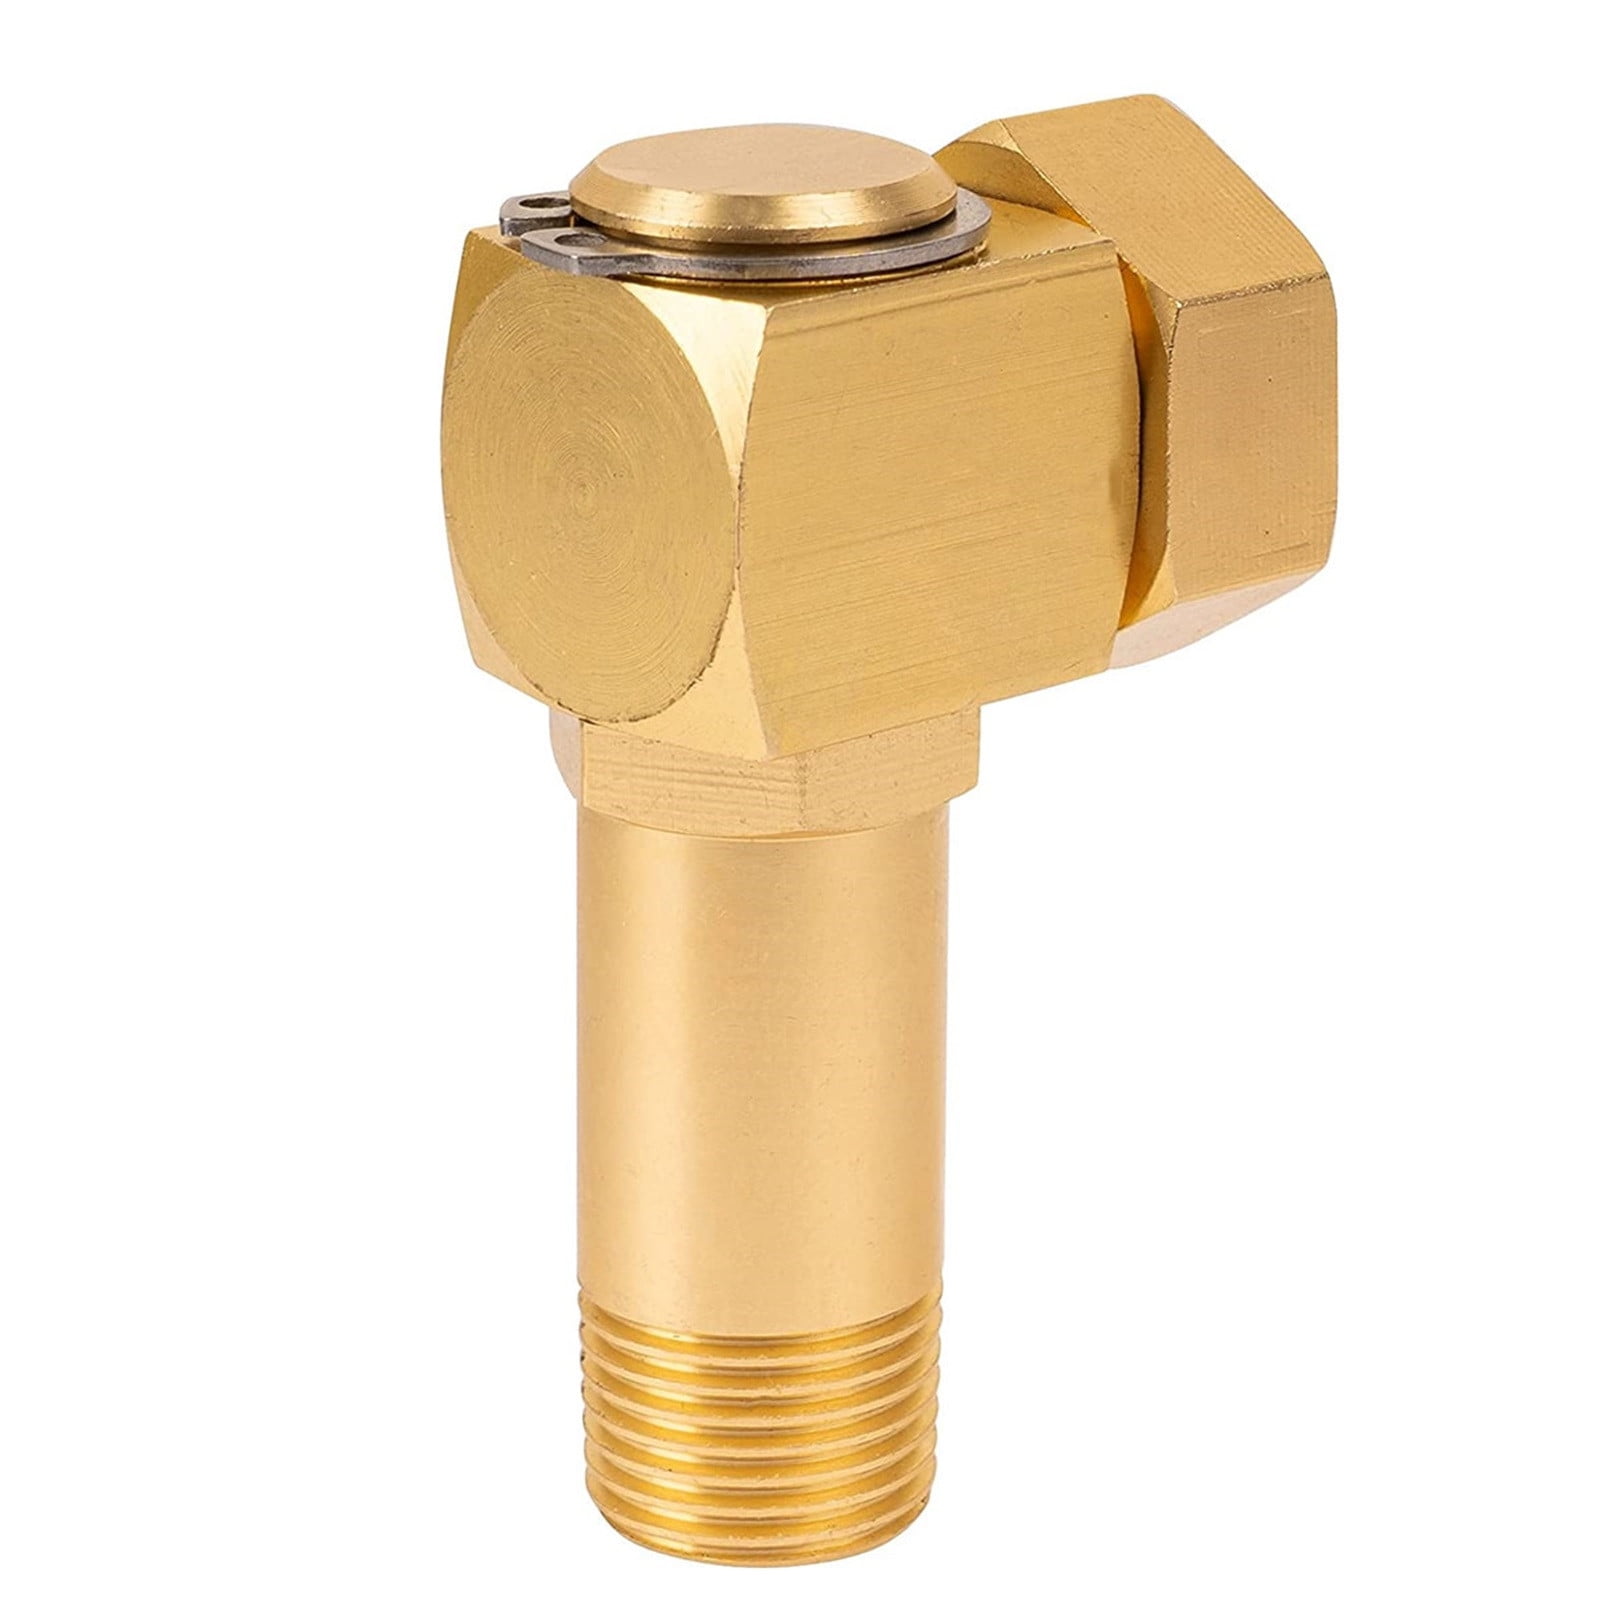 Moocorvic Hose Reel Parts Fittings Garden Hose Adapter Brass Replacement  Part Swivel Hose Reel Cart Fitting for Garden Hose Adapter Hose Cart